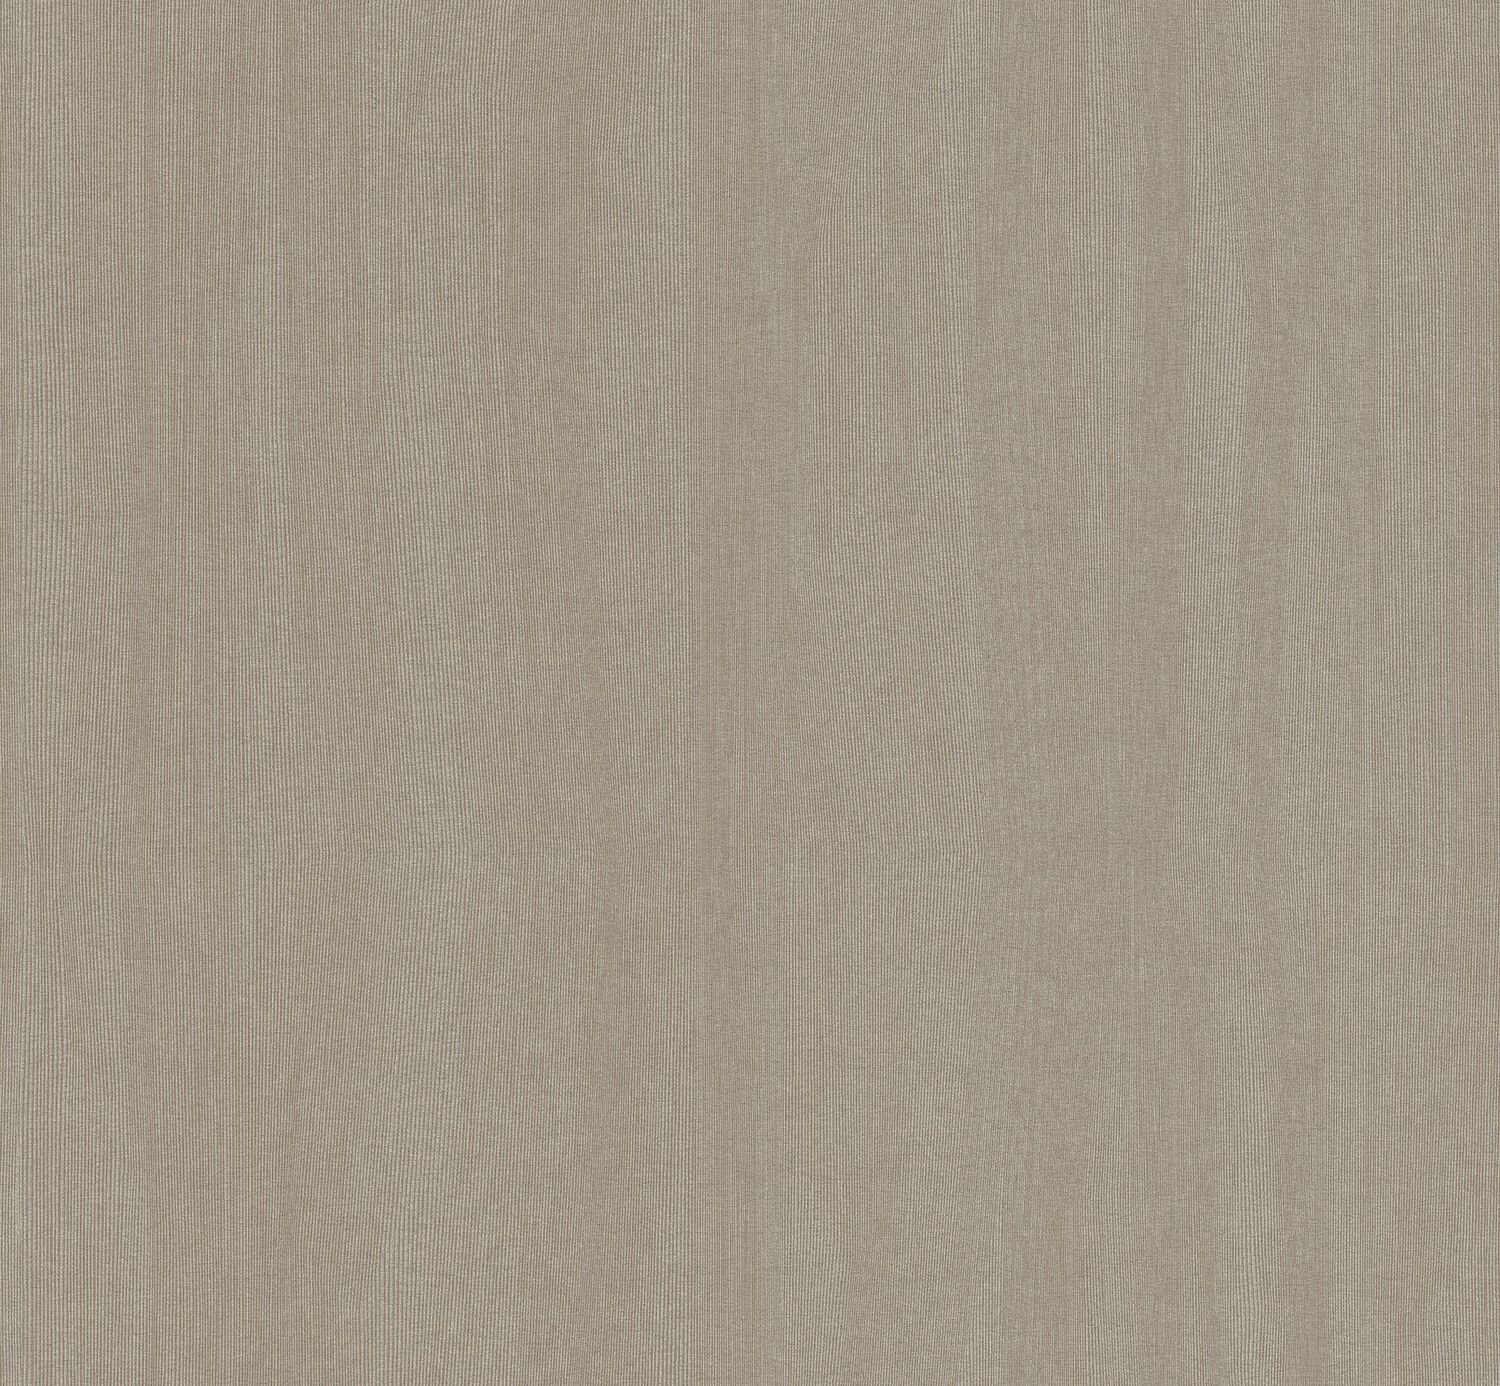 Juxtapose - Timber - 7020 - 04 Tileable Swatches